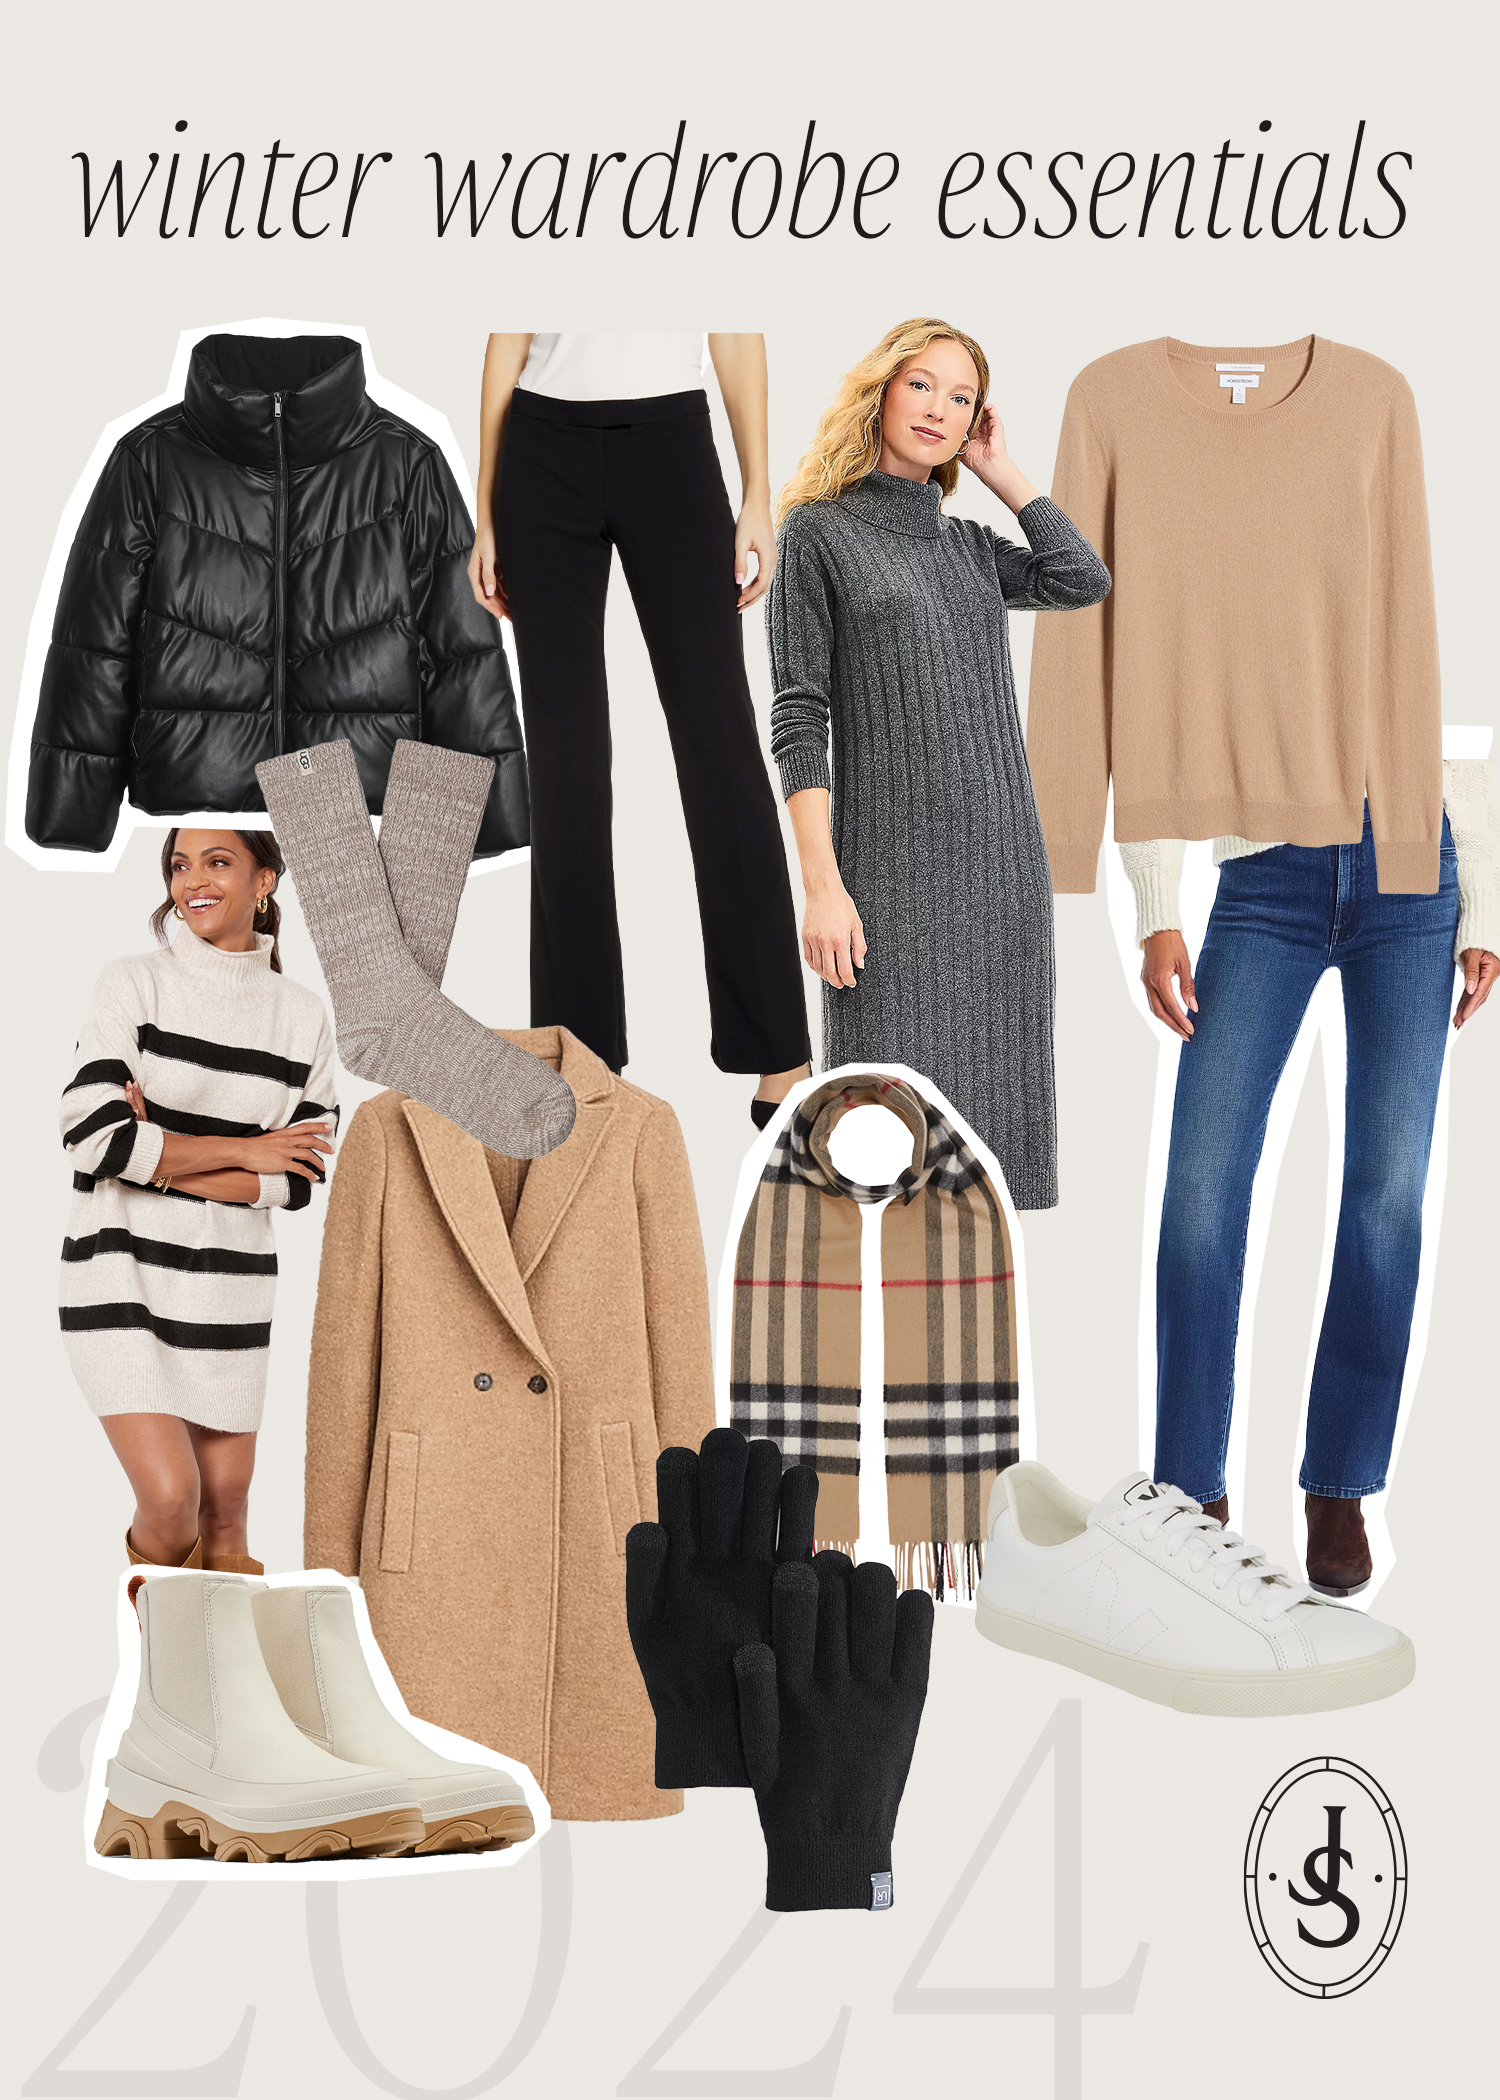 10 Winter Outfit Clothing Staples Every Woman Needs